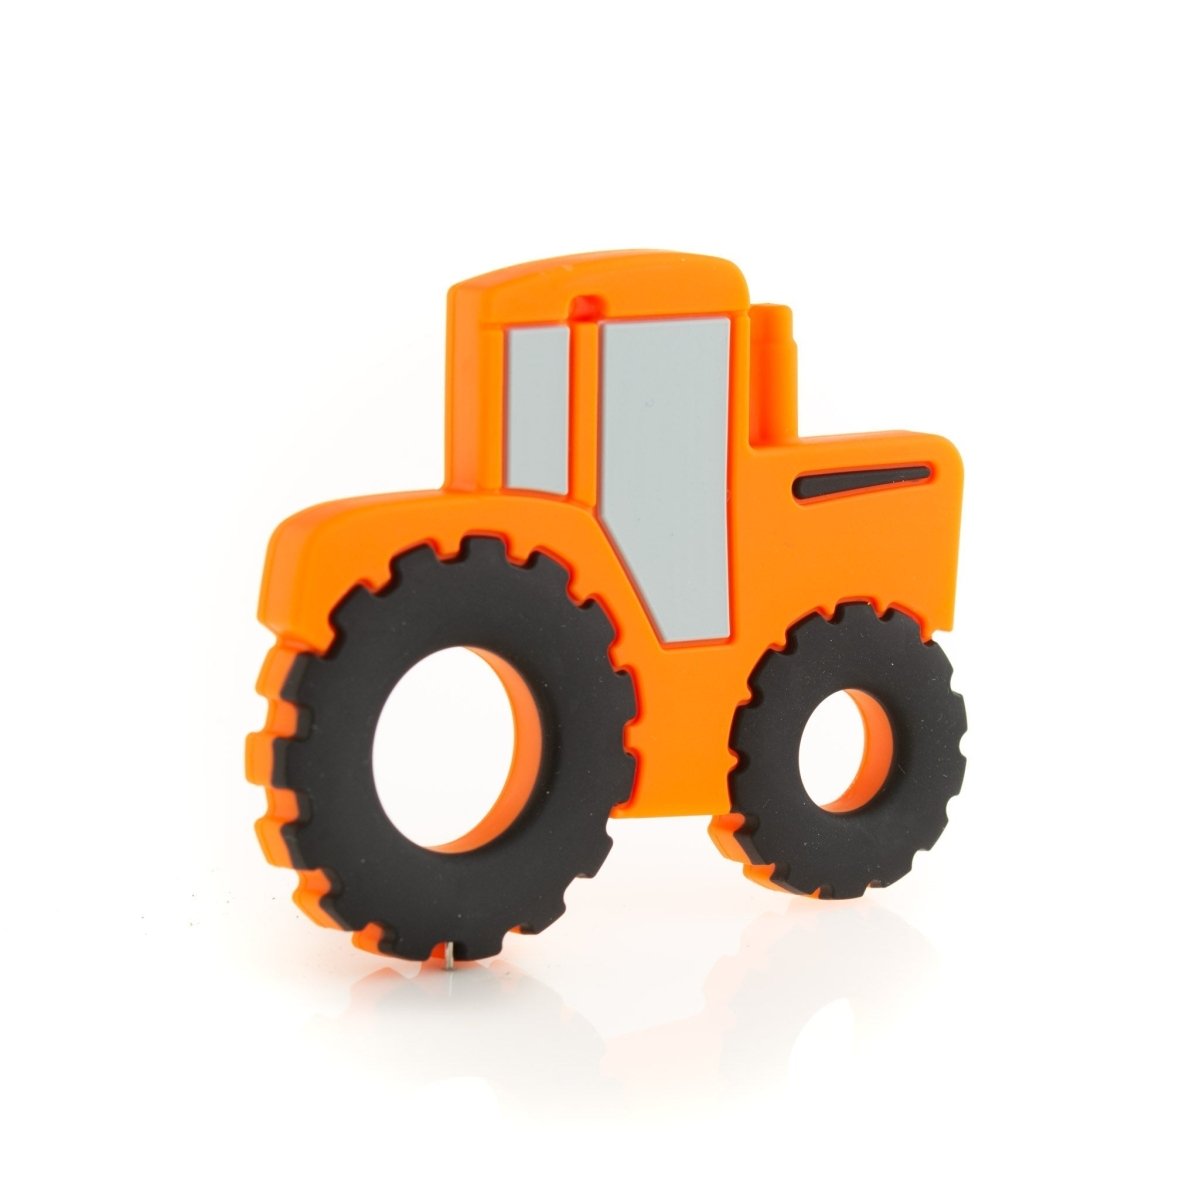 Silicone Teethers and Pendants Tractors Tangerine Orange from Cara & Co Craft Supply